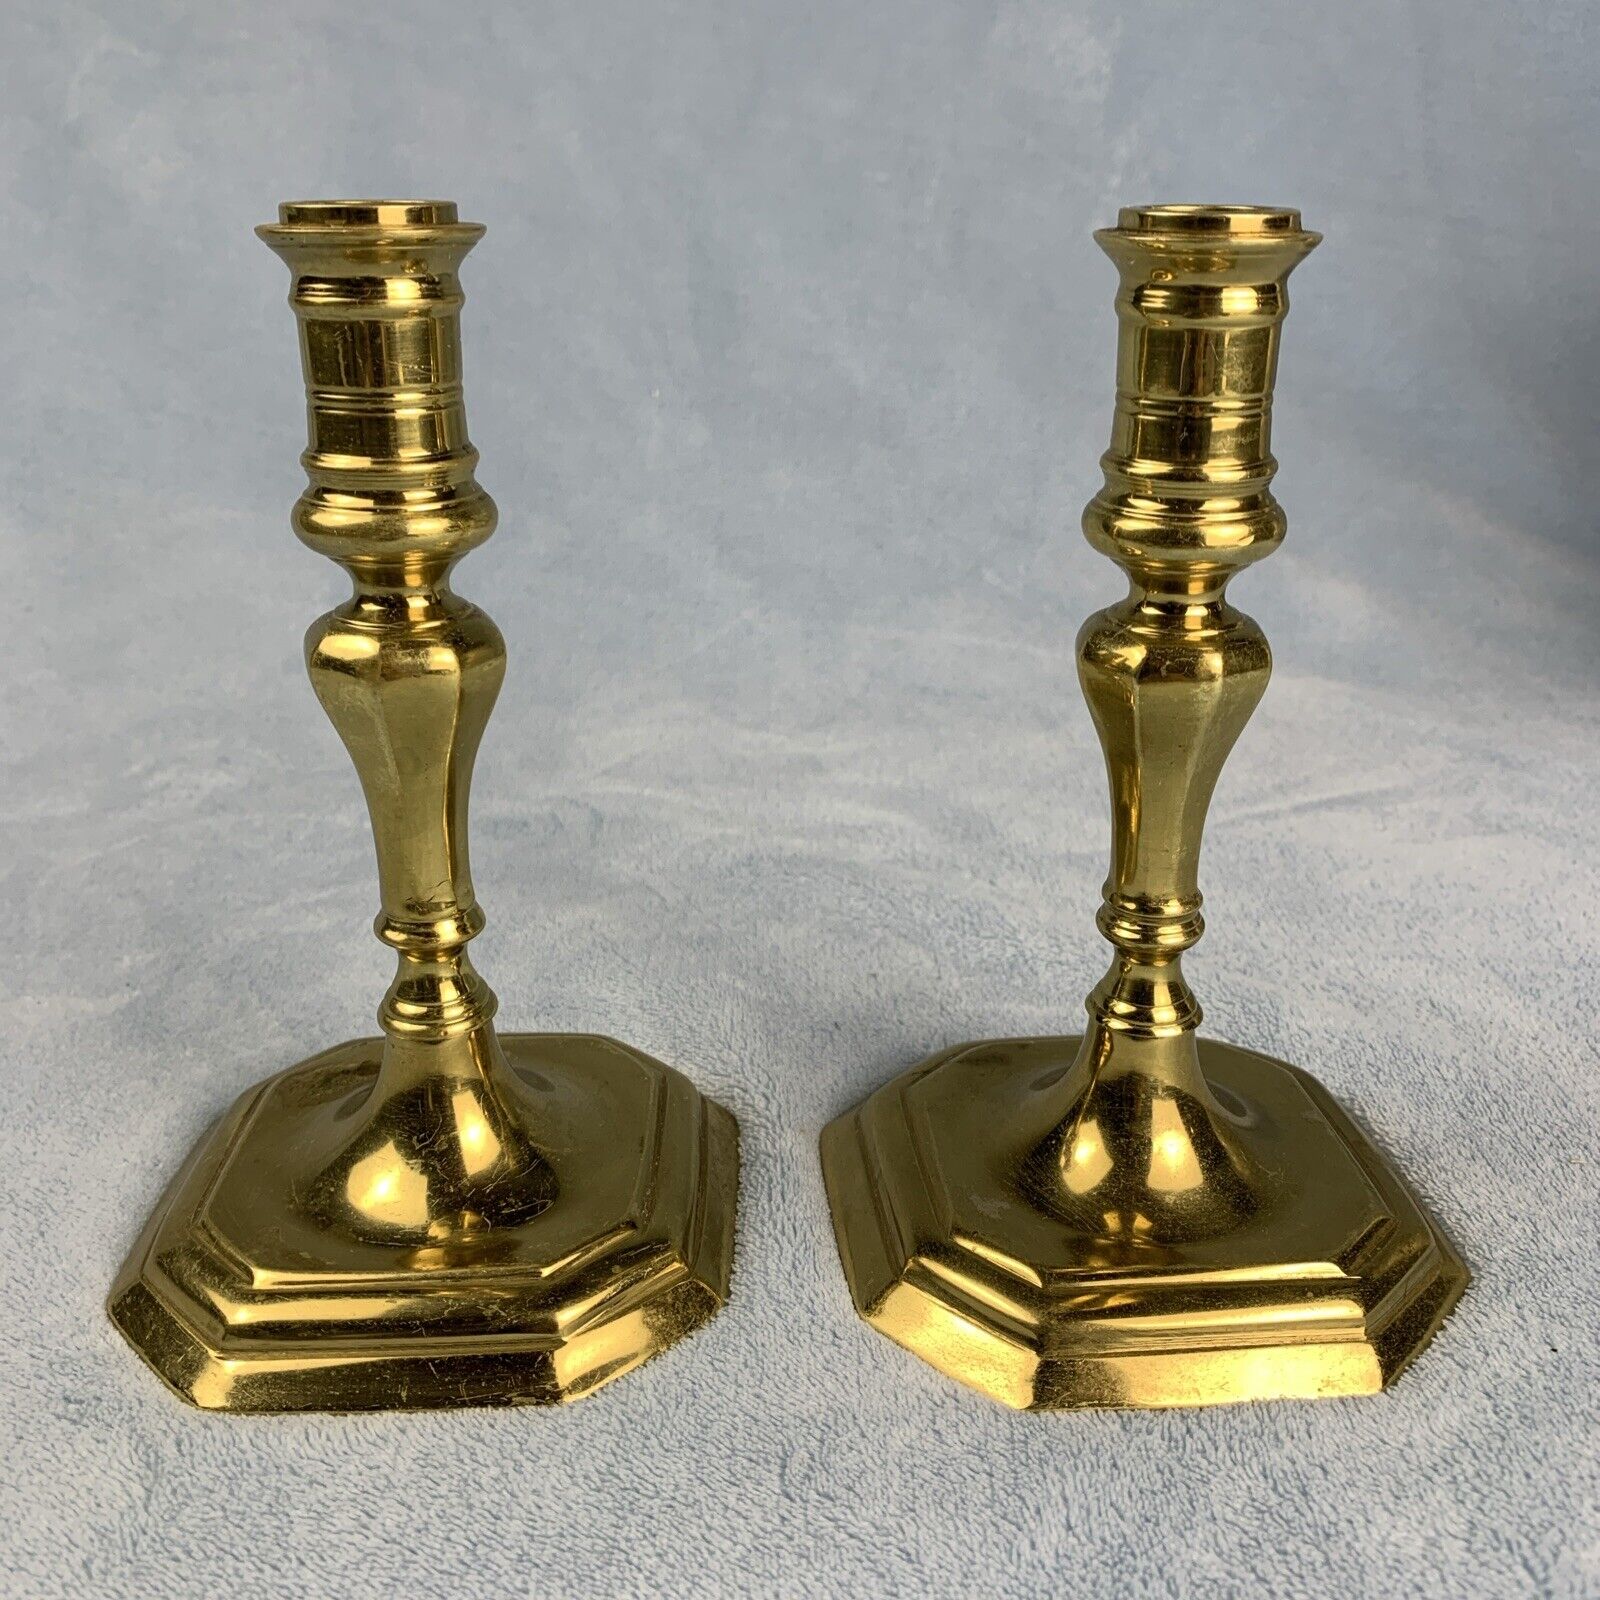 Pair of Virginia Metalcrafters Colonial Williamsburg Brass Candlesticks CW 16-35